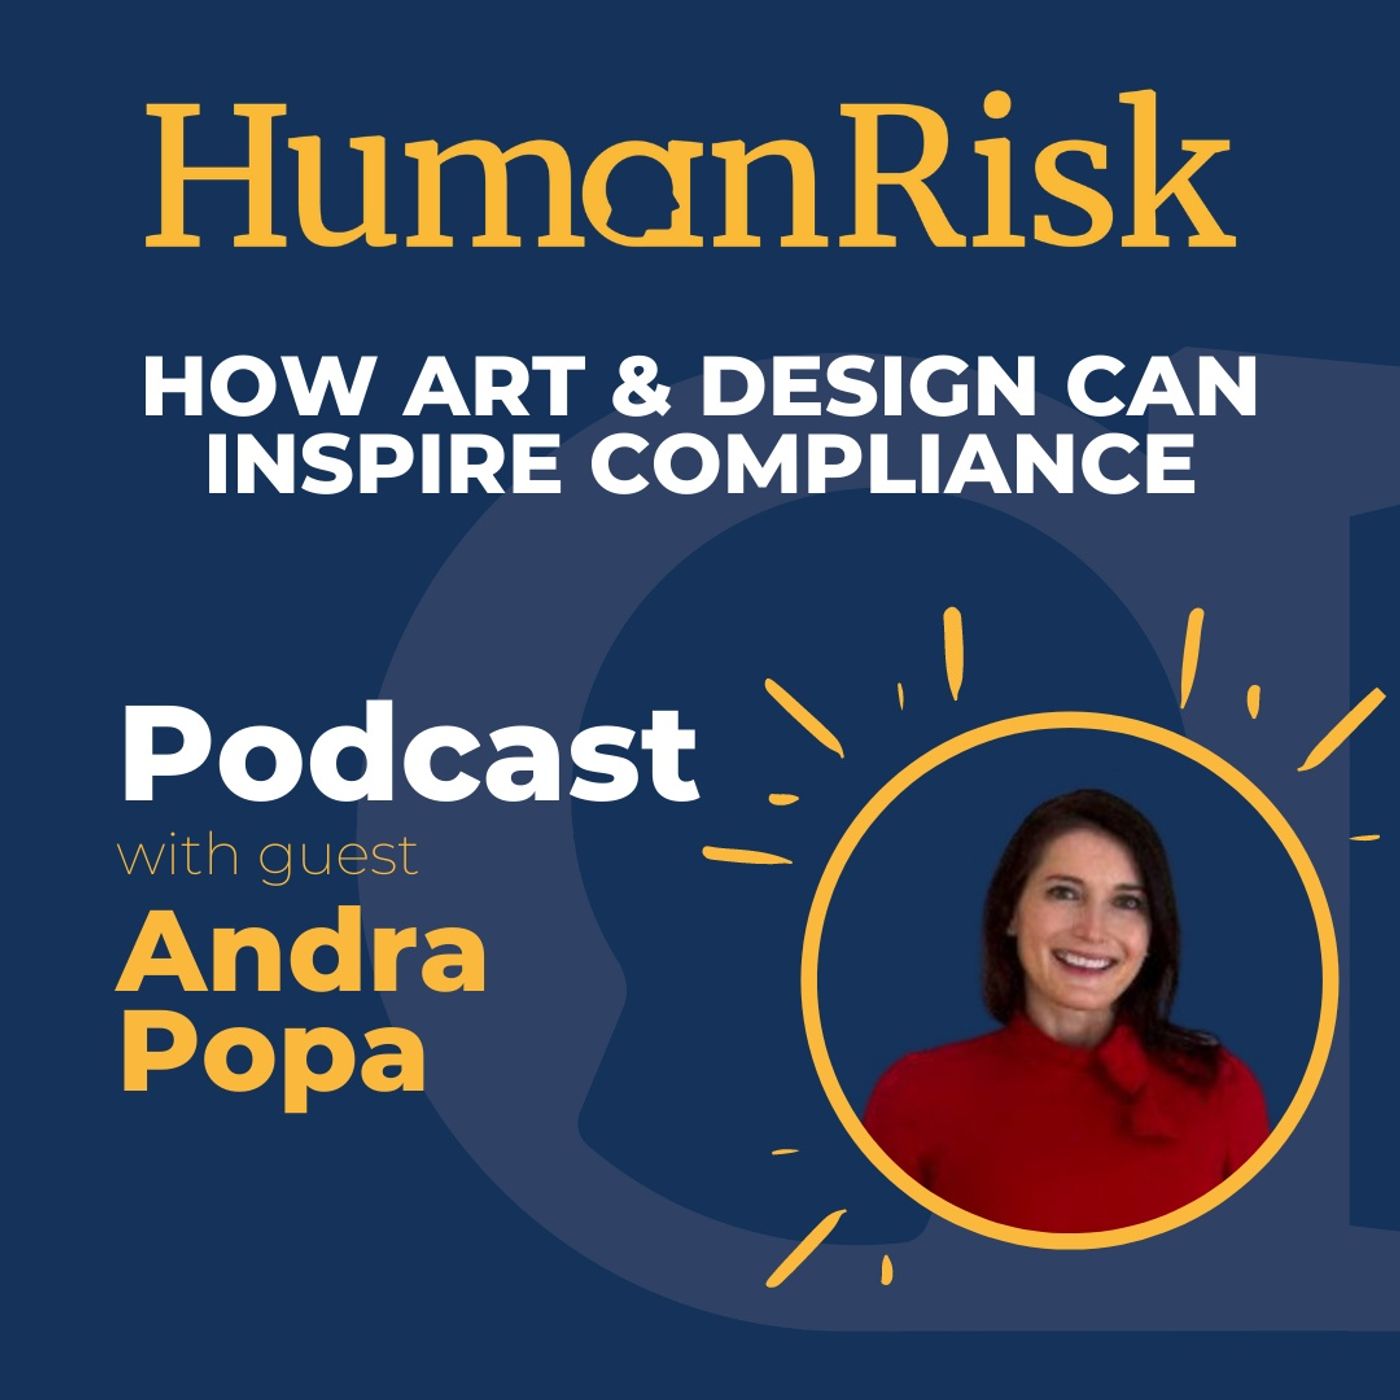 Andra Popa on how Art & Design can inspire Compliance